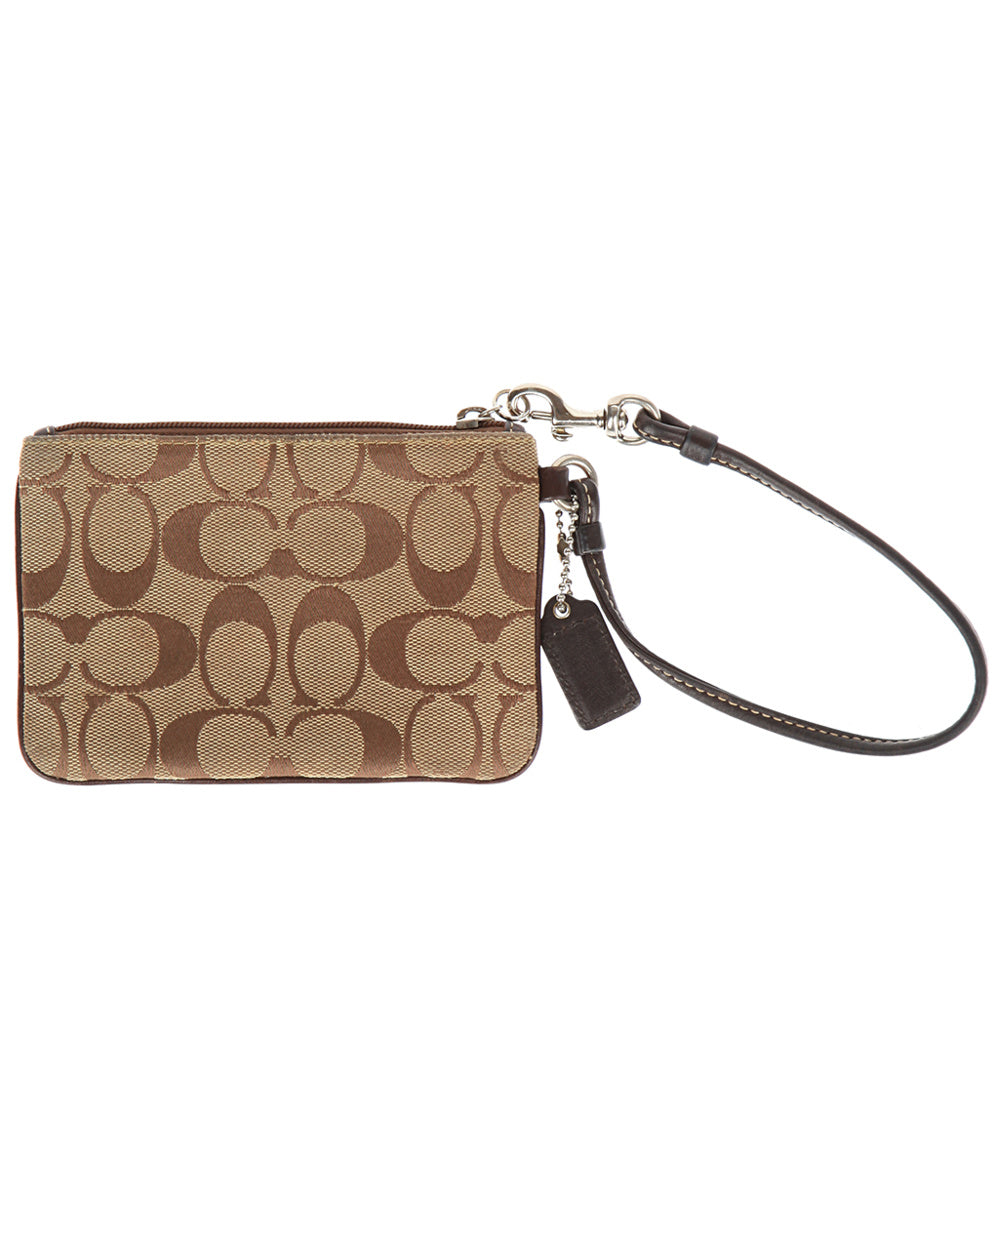 Coach Brown Leather Purse